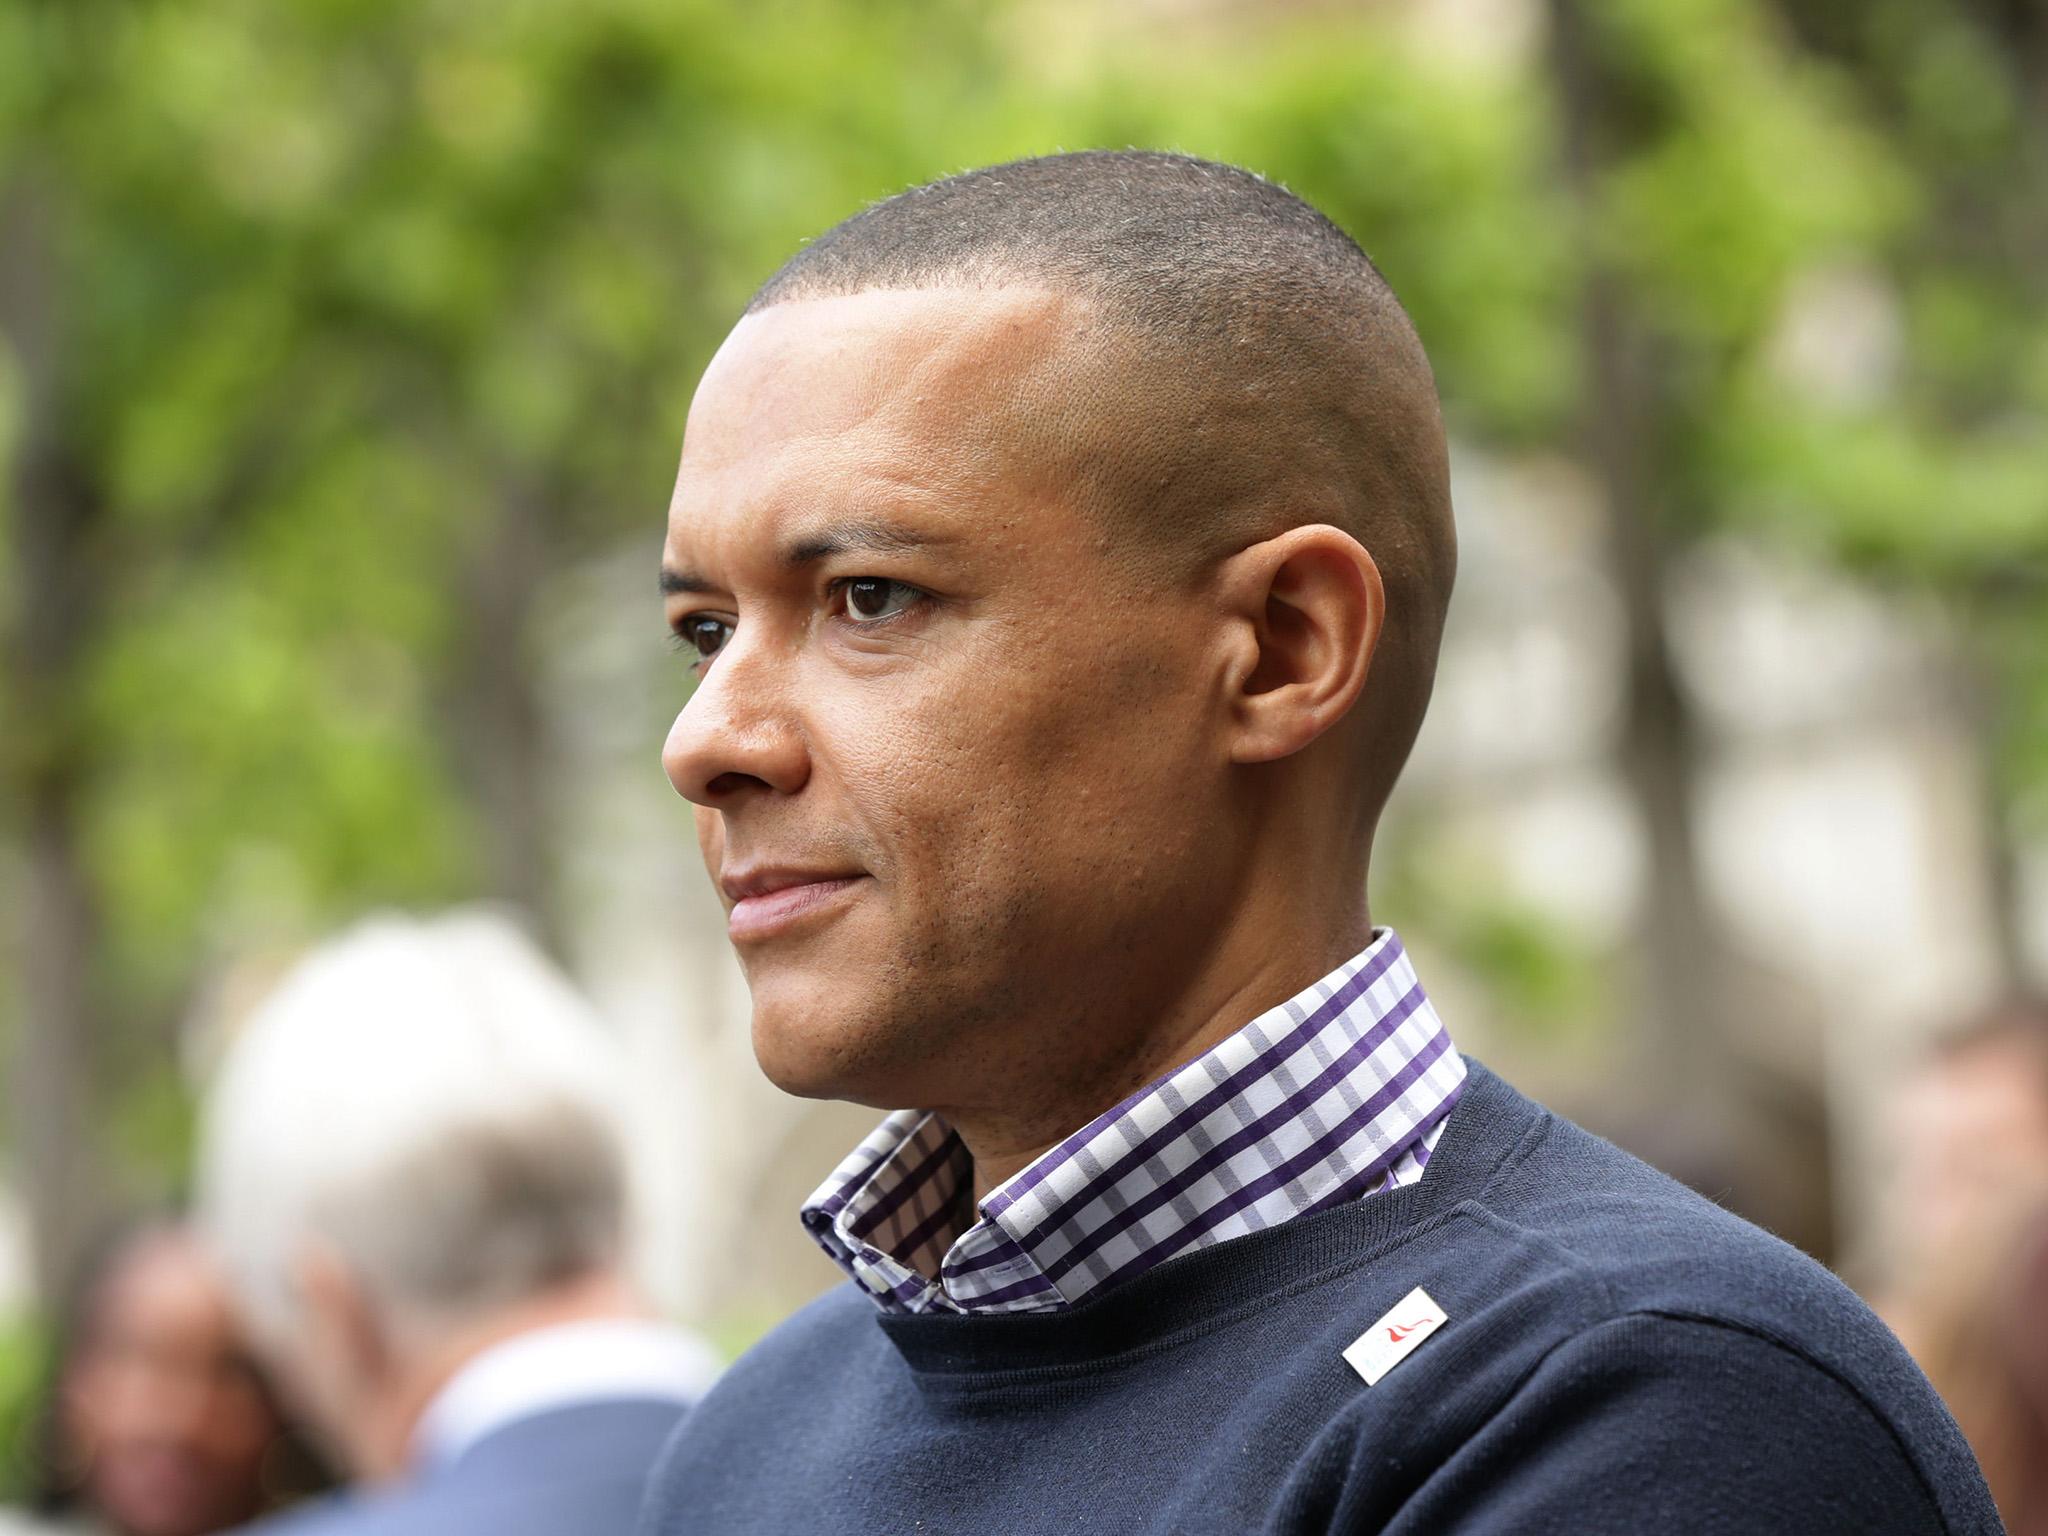 Clive Lewis said Government is 'reaping the whirlwind of penny-pinching austerity'